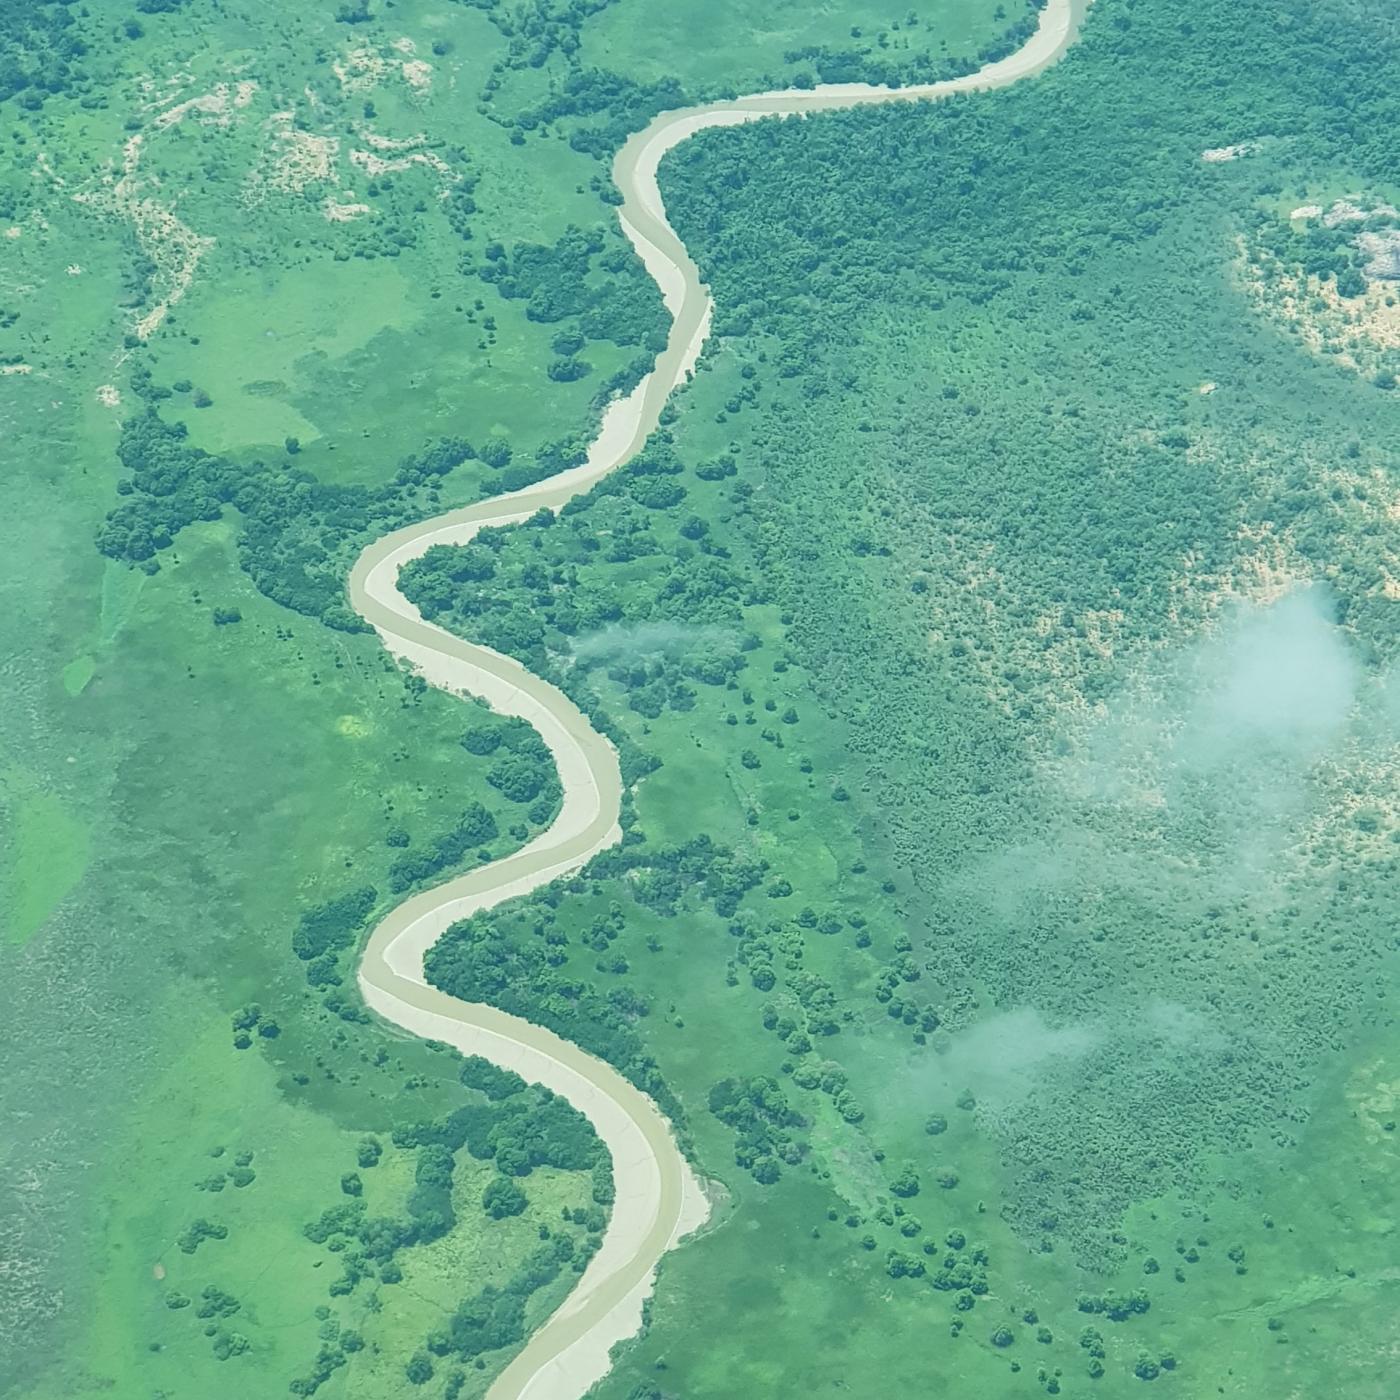 An aerial view of a river snaking through green country